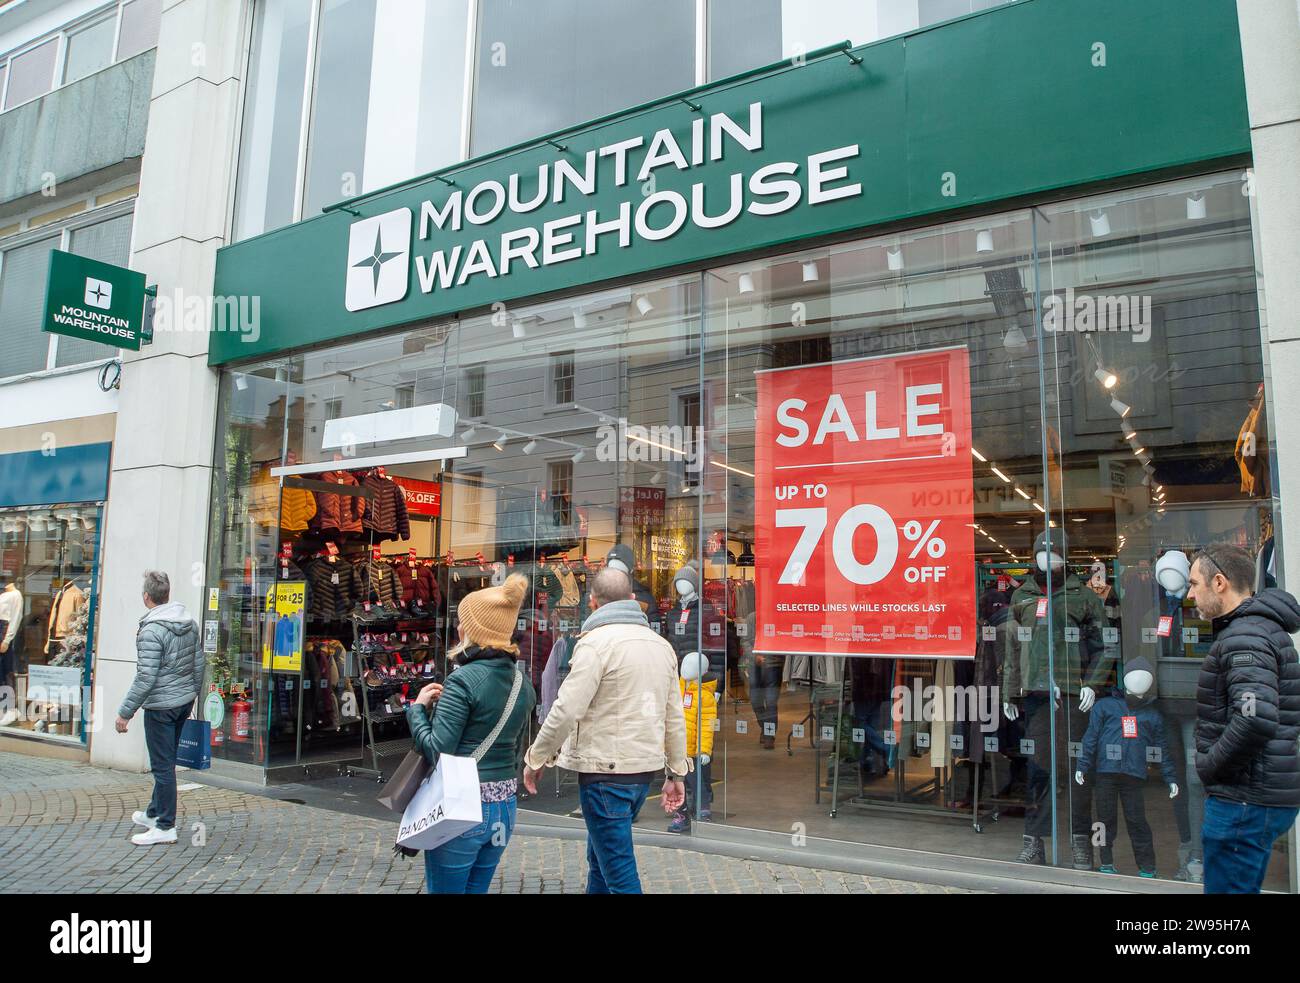 Mountain Warehouse on X: Did you know that we're offering up to 60% off  all Mountain Warehouse items in-store now? Come and see us in store this  week to check out our